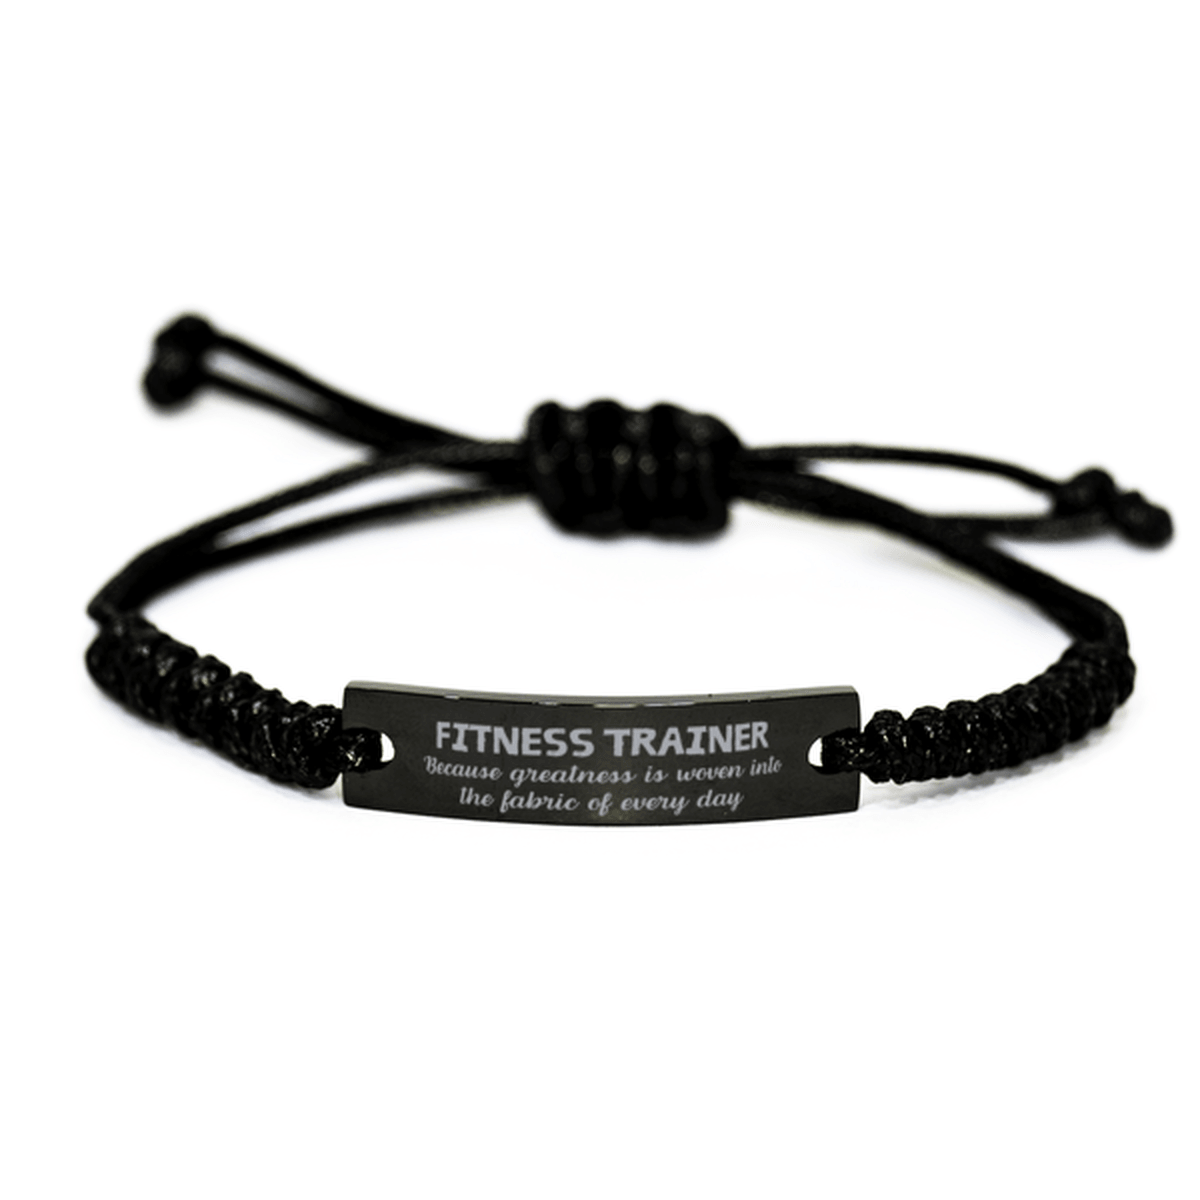 Sarcastic Fitness Trainer Black Rope Bracelet Gifts, Christmas Holiday Gifts for Fitness Trainer Birthday, Fitness Trainer: Because greatness is woven into the fabric of every day, Coworkers, Friends - Mallard Moon Gift Shop